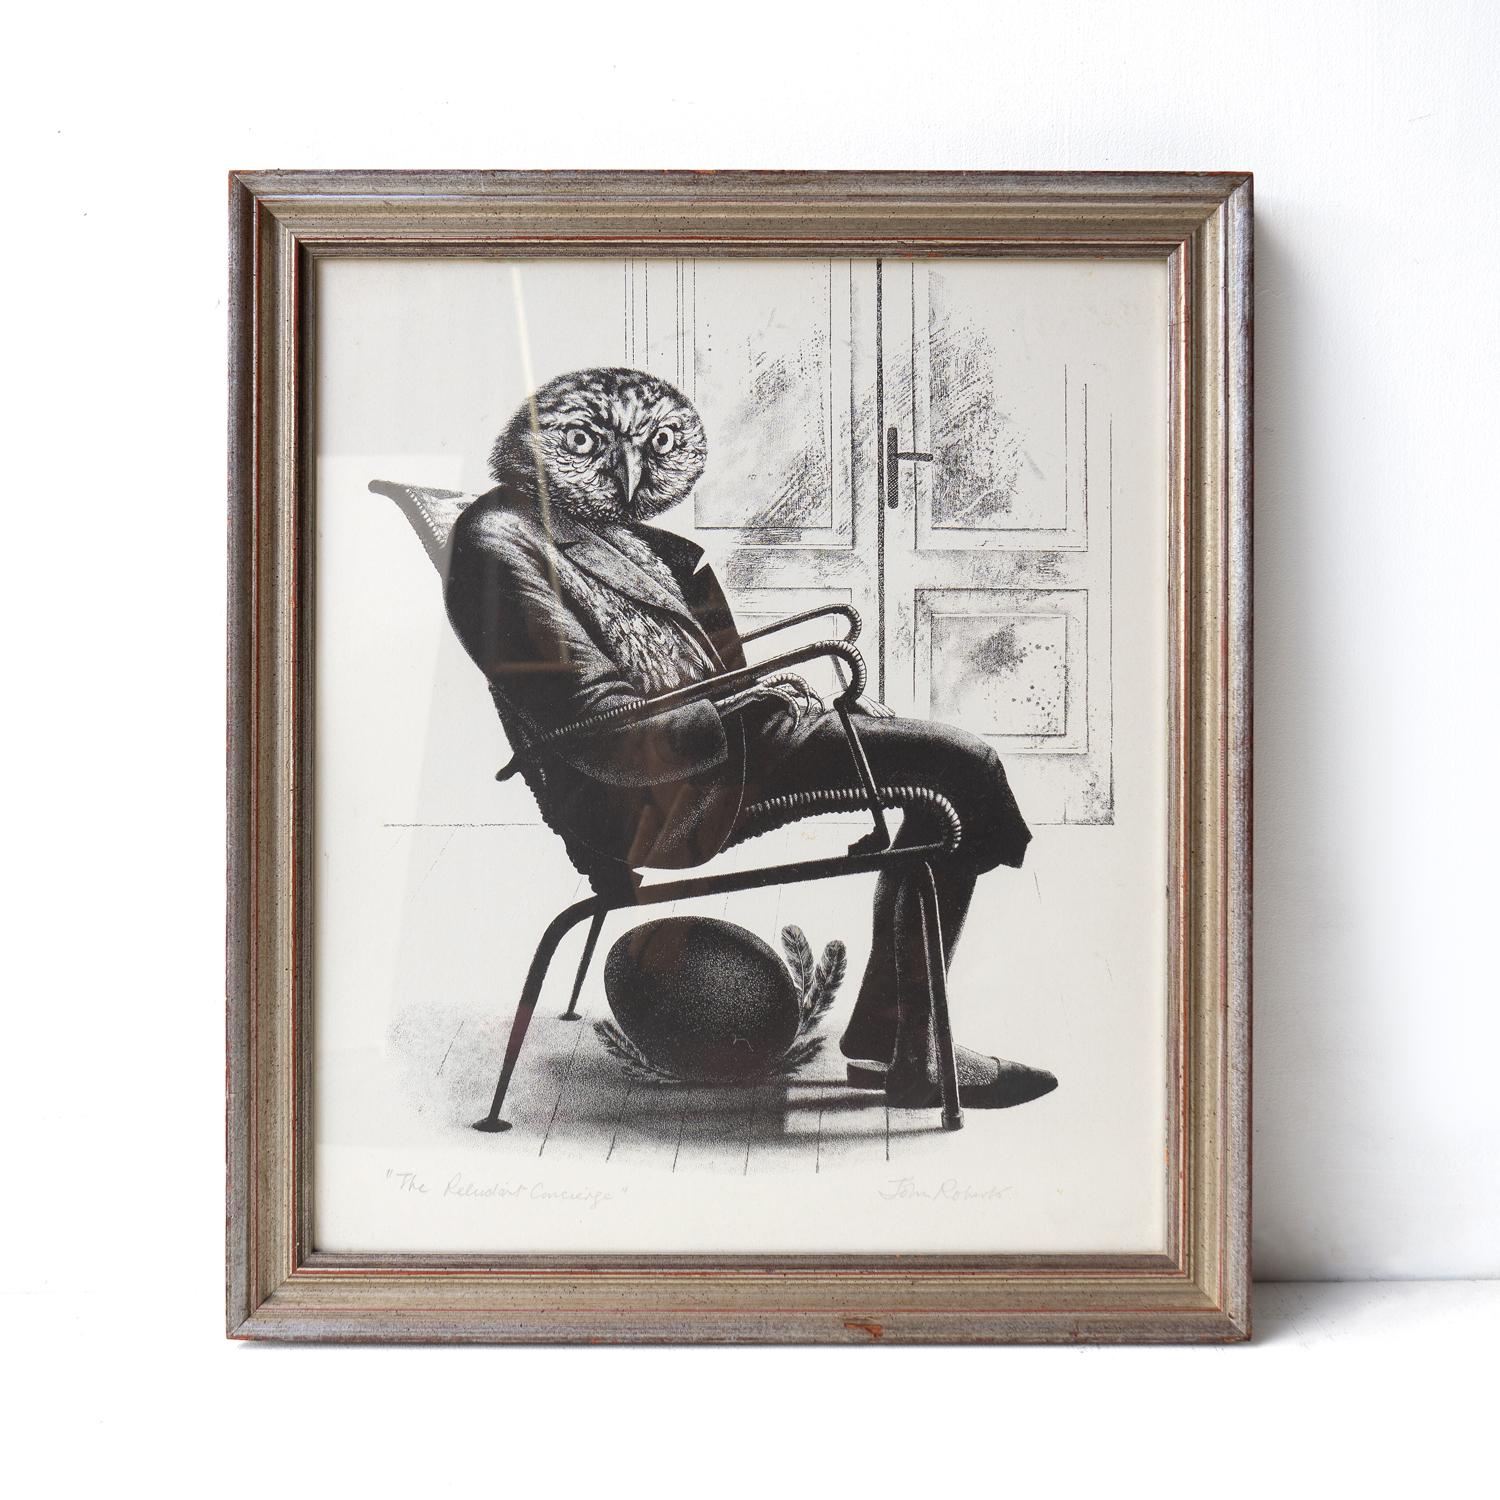 VINTAGE FRAMED PRINT
Entitled ‘The Reluctant Concierge’, An owl in human clothes is guarding an egg situated underneath his stylish mid-century armchair. 

Signed in the margin in pencil ‘John Roberts’. 

Probably dating to the mid-20th Century,